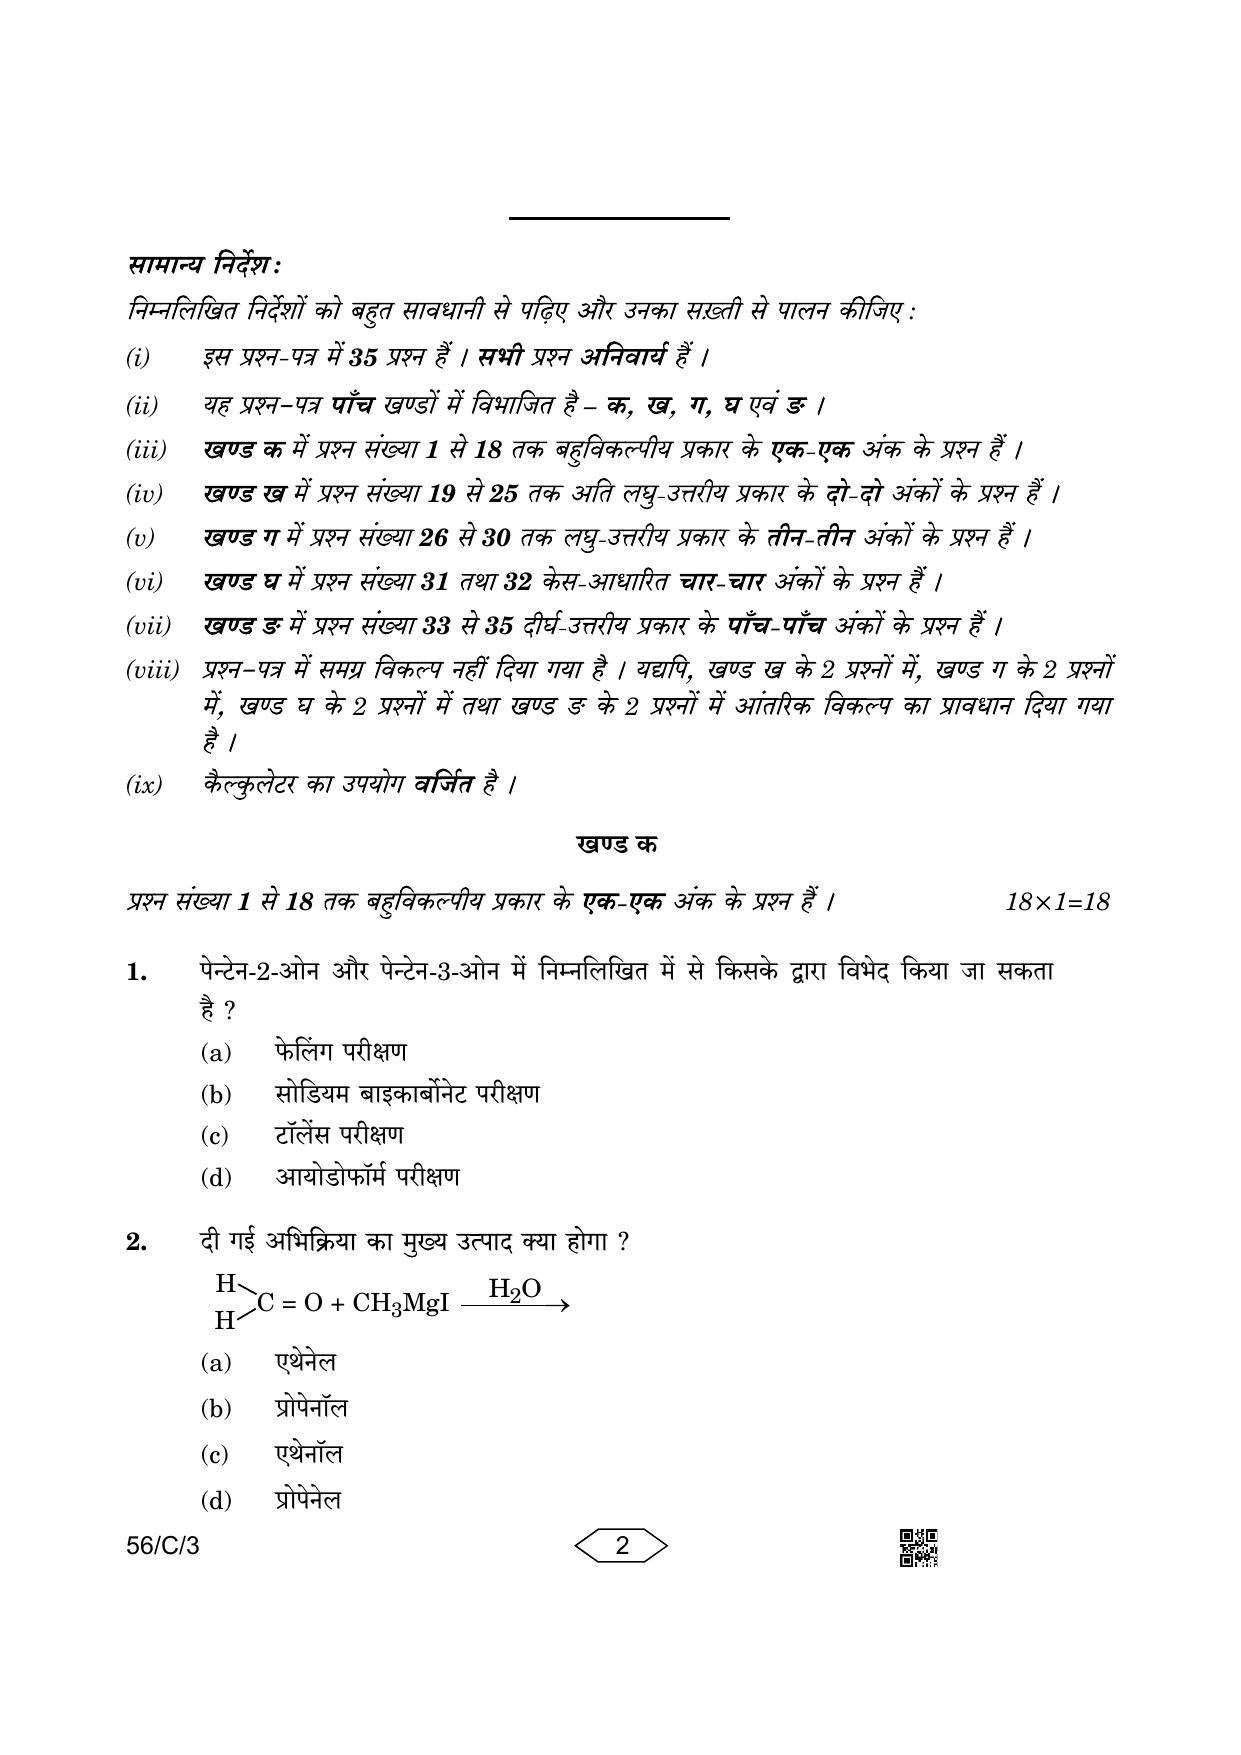 CBSE Class 12 56-3 Chemistry 2023 (Compartment) Question Paper - Page 2